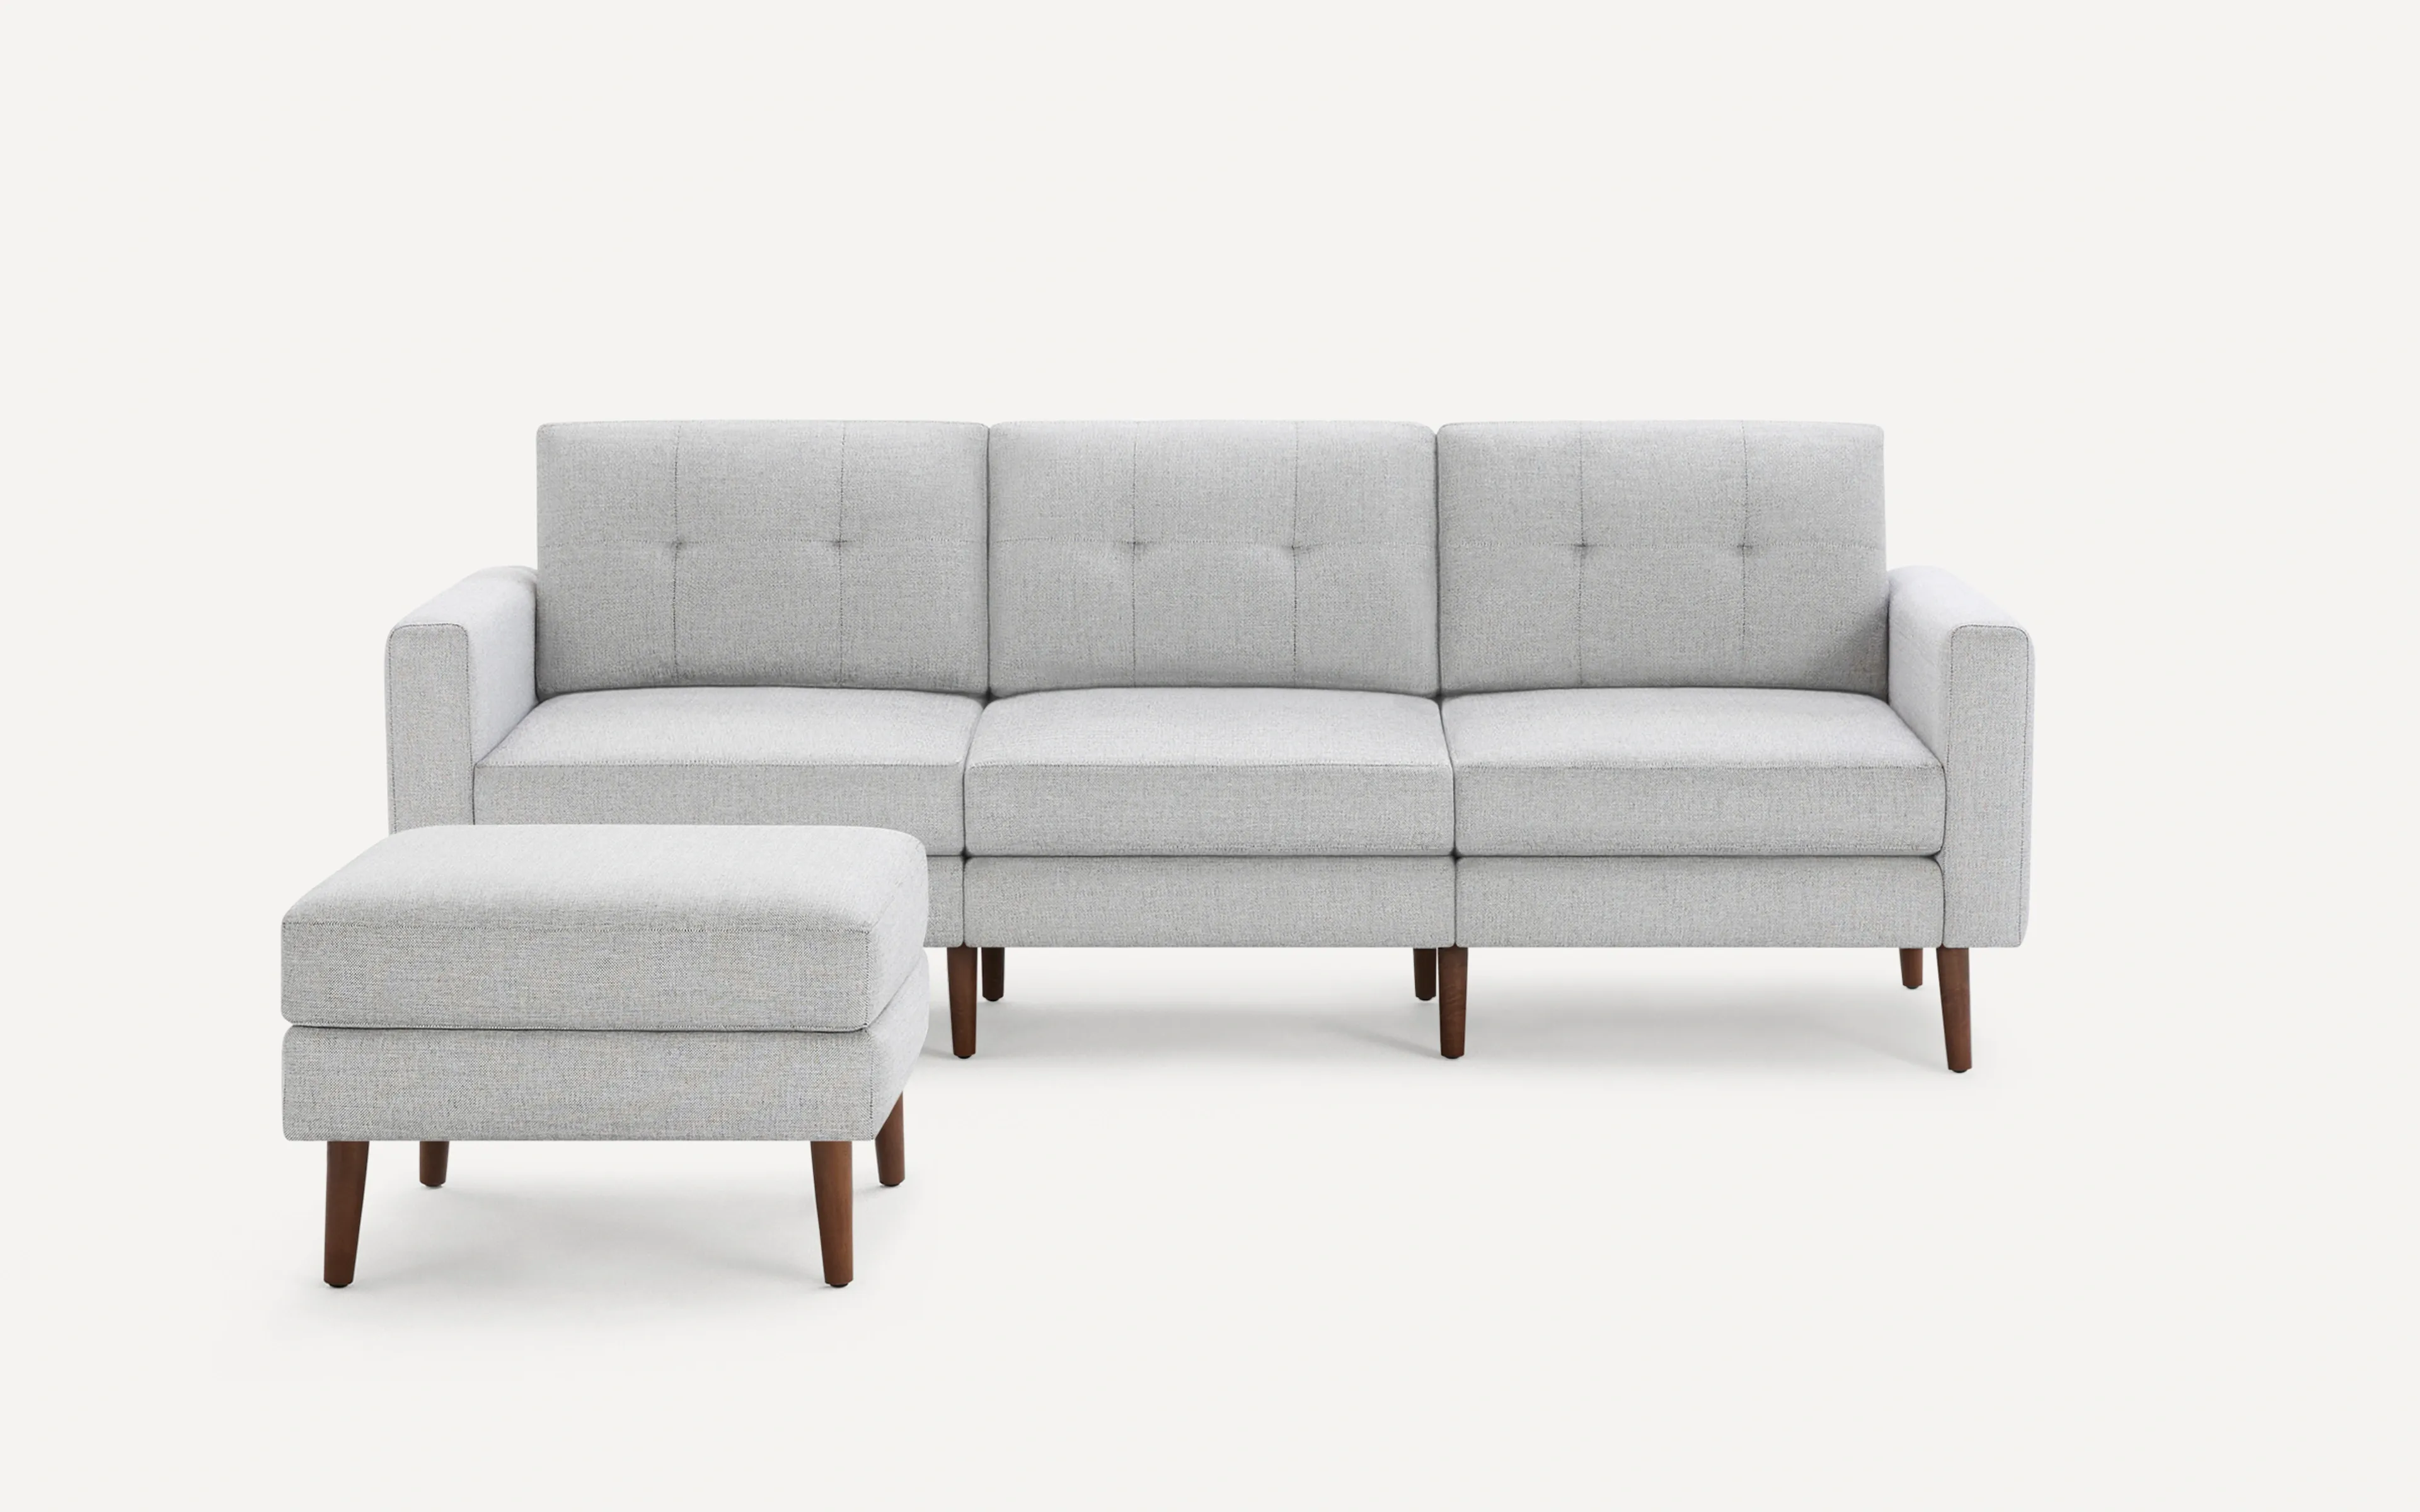 Original Nomad Sofa with Ottoman in Crushed Gravel Fabric